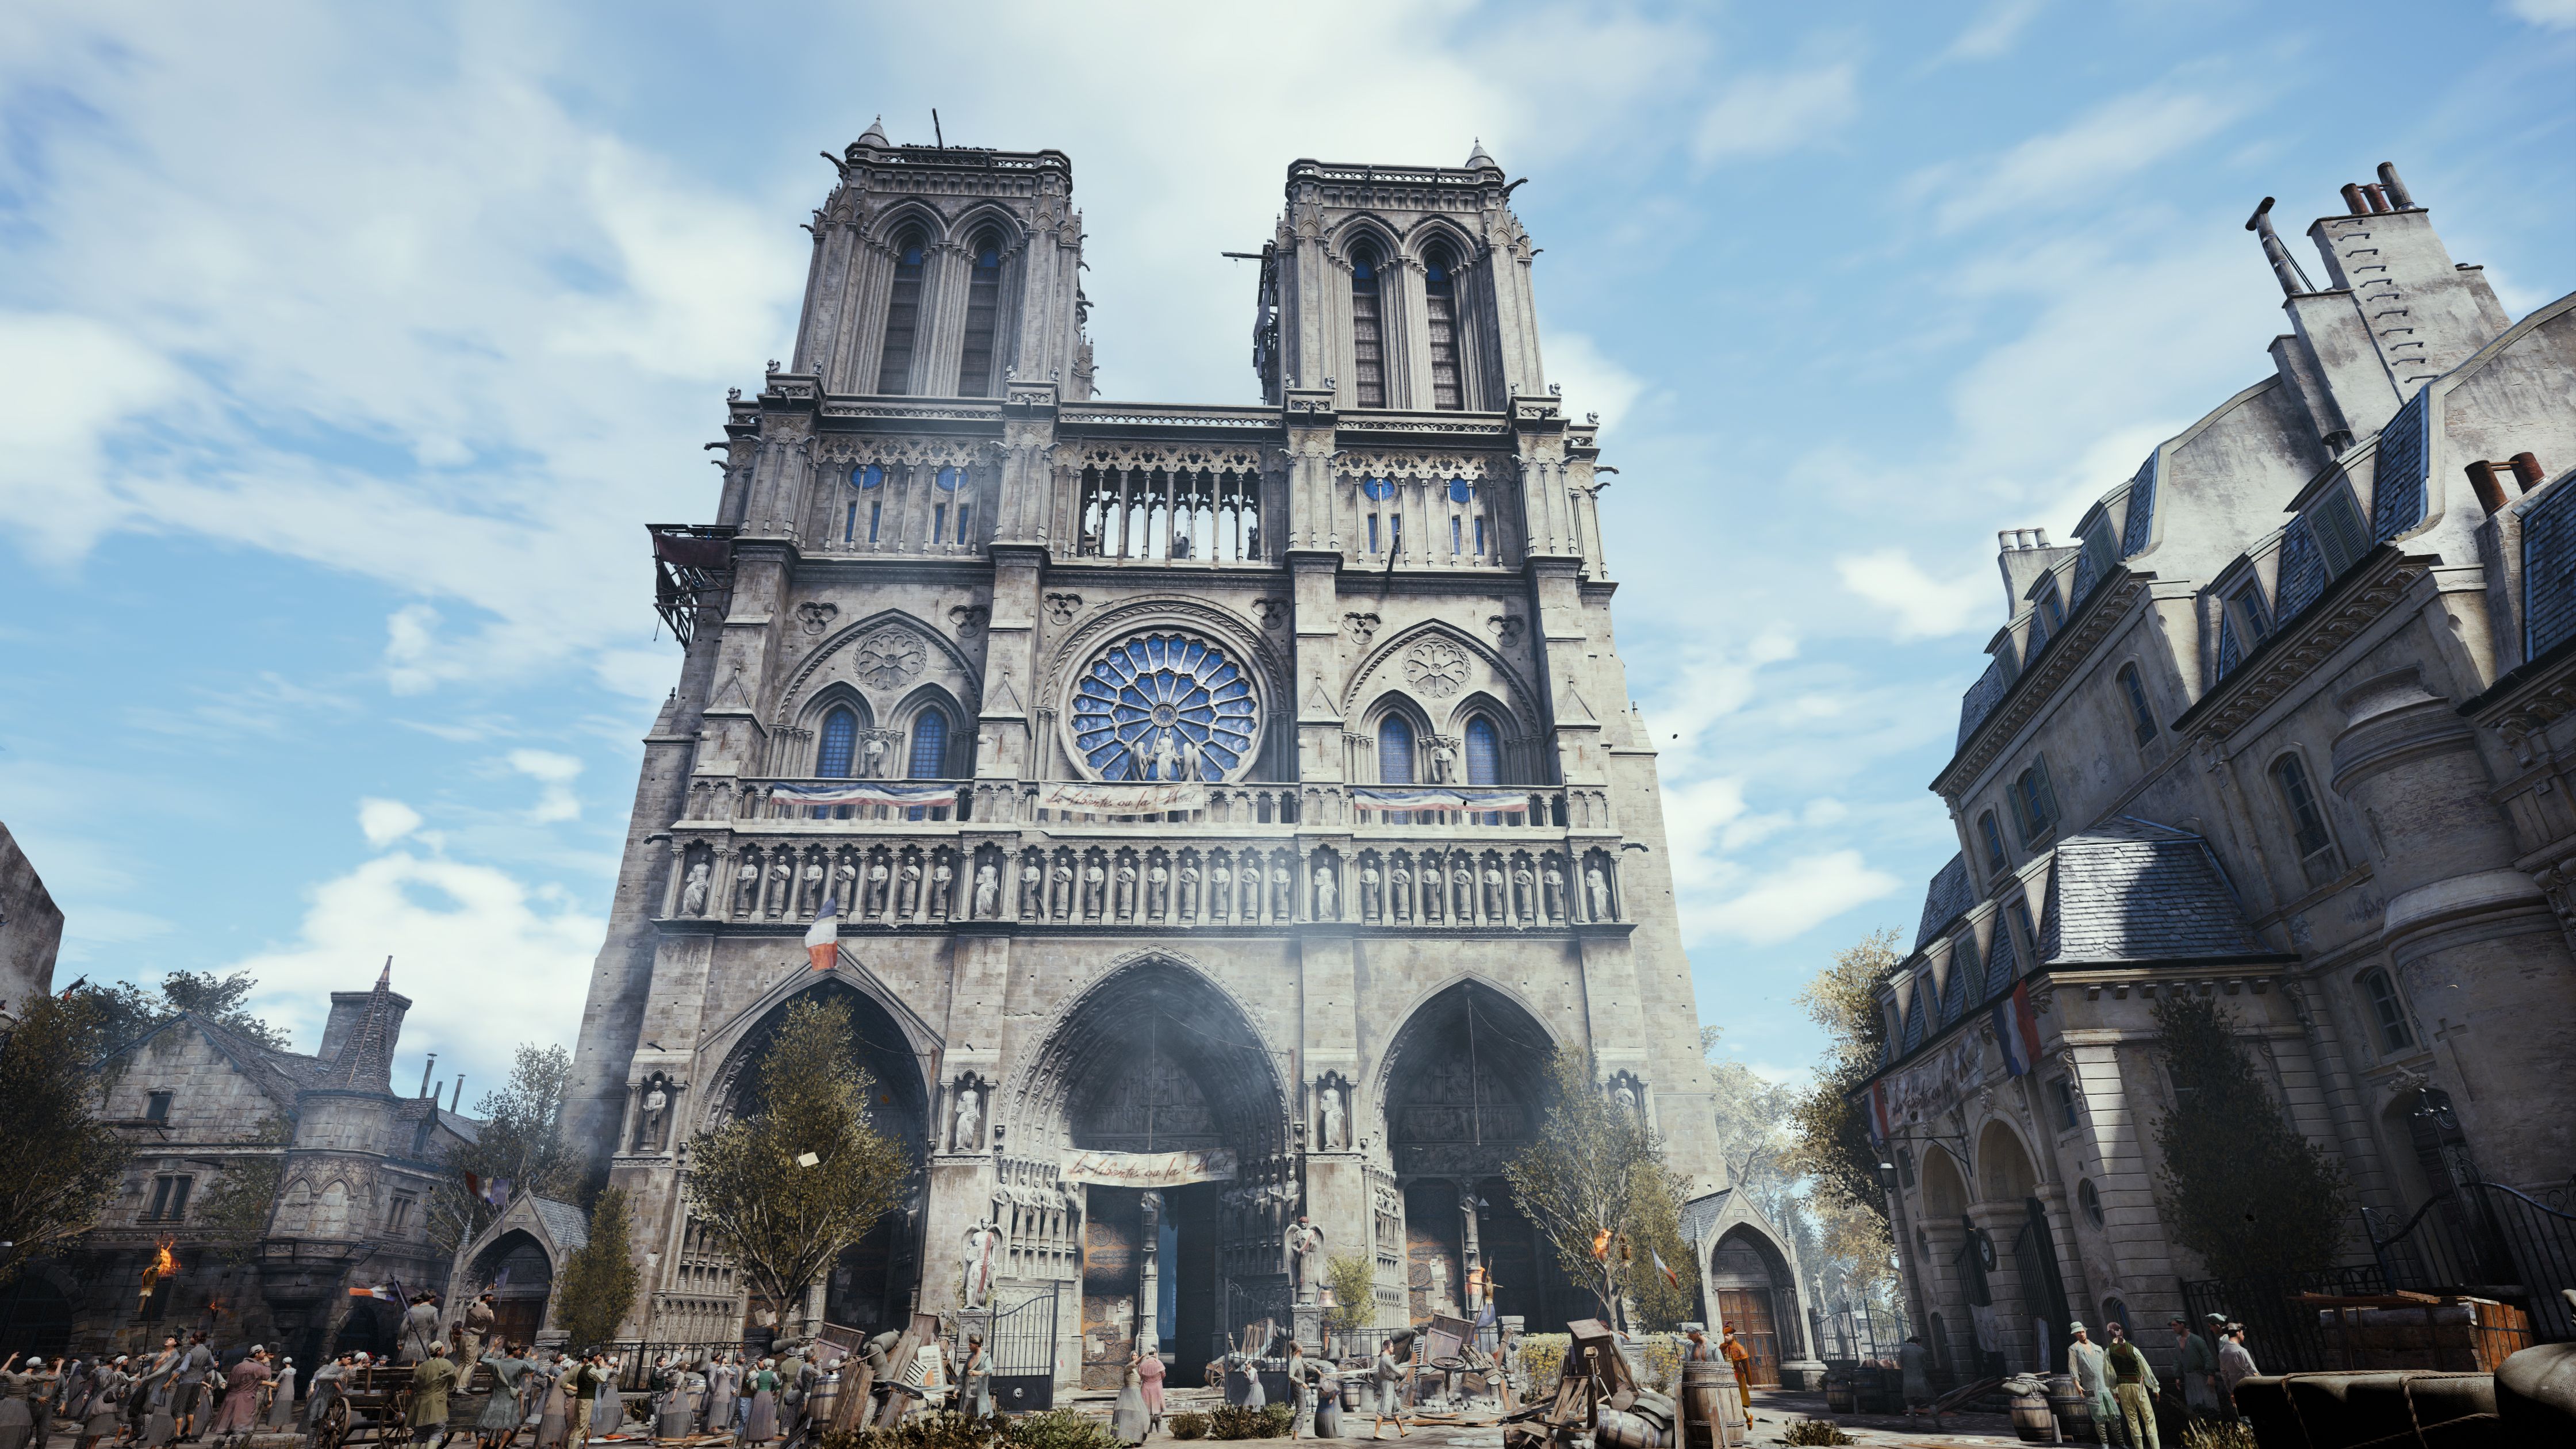 assassin s creed 5 unity preview familiar format draws upon multi player to evolve series image 11